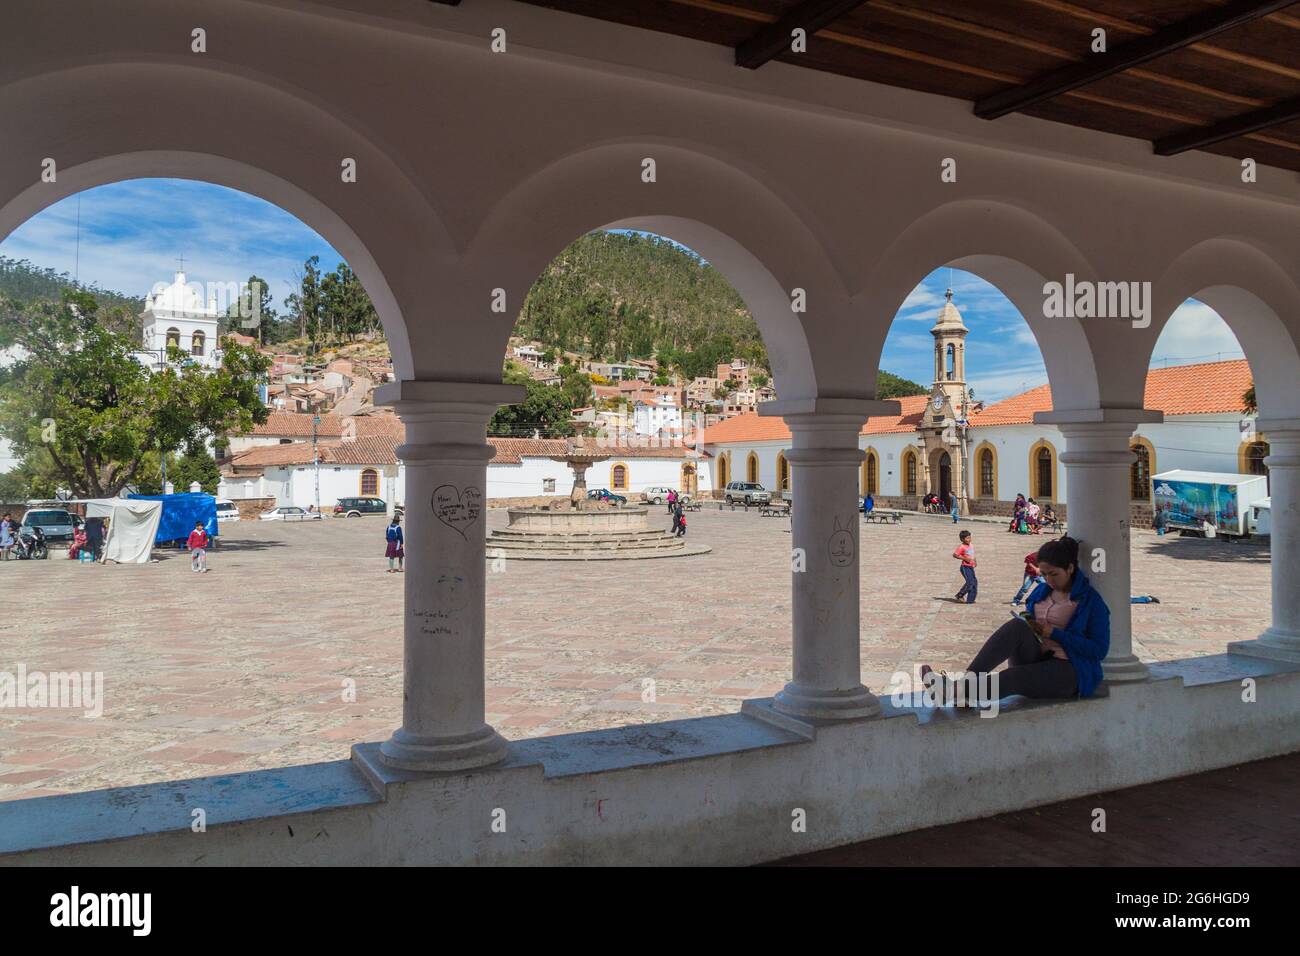 SUCRE, BOLIVIA - APRIL 22, 2015: White colonial houses and an archway on Plaza Anzures square in Sucre, capital of Bolivia. Stock Photo